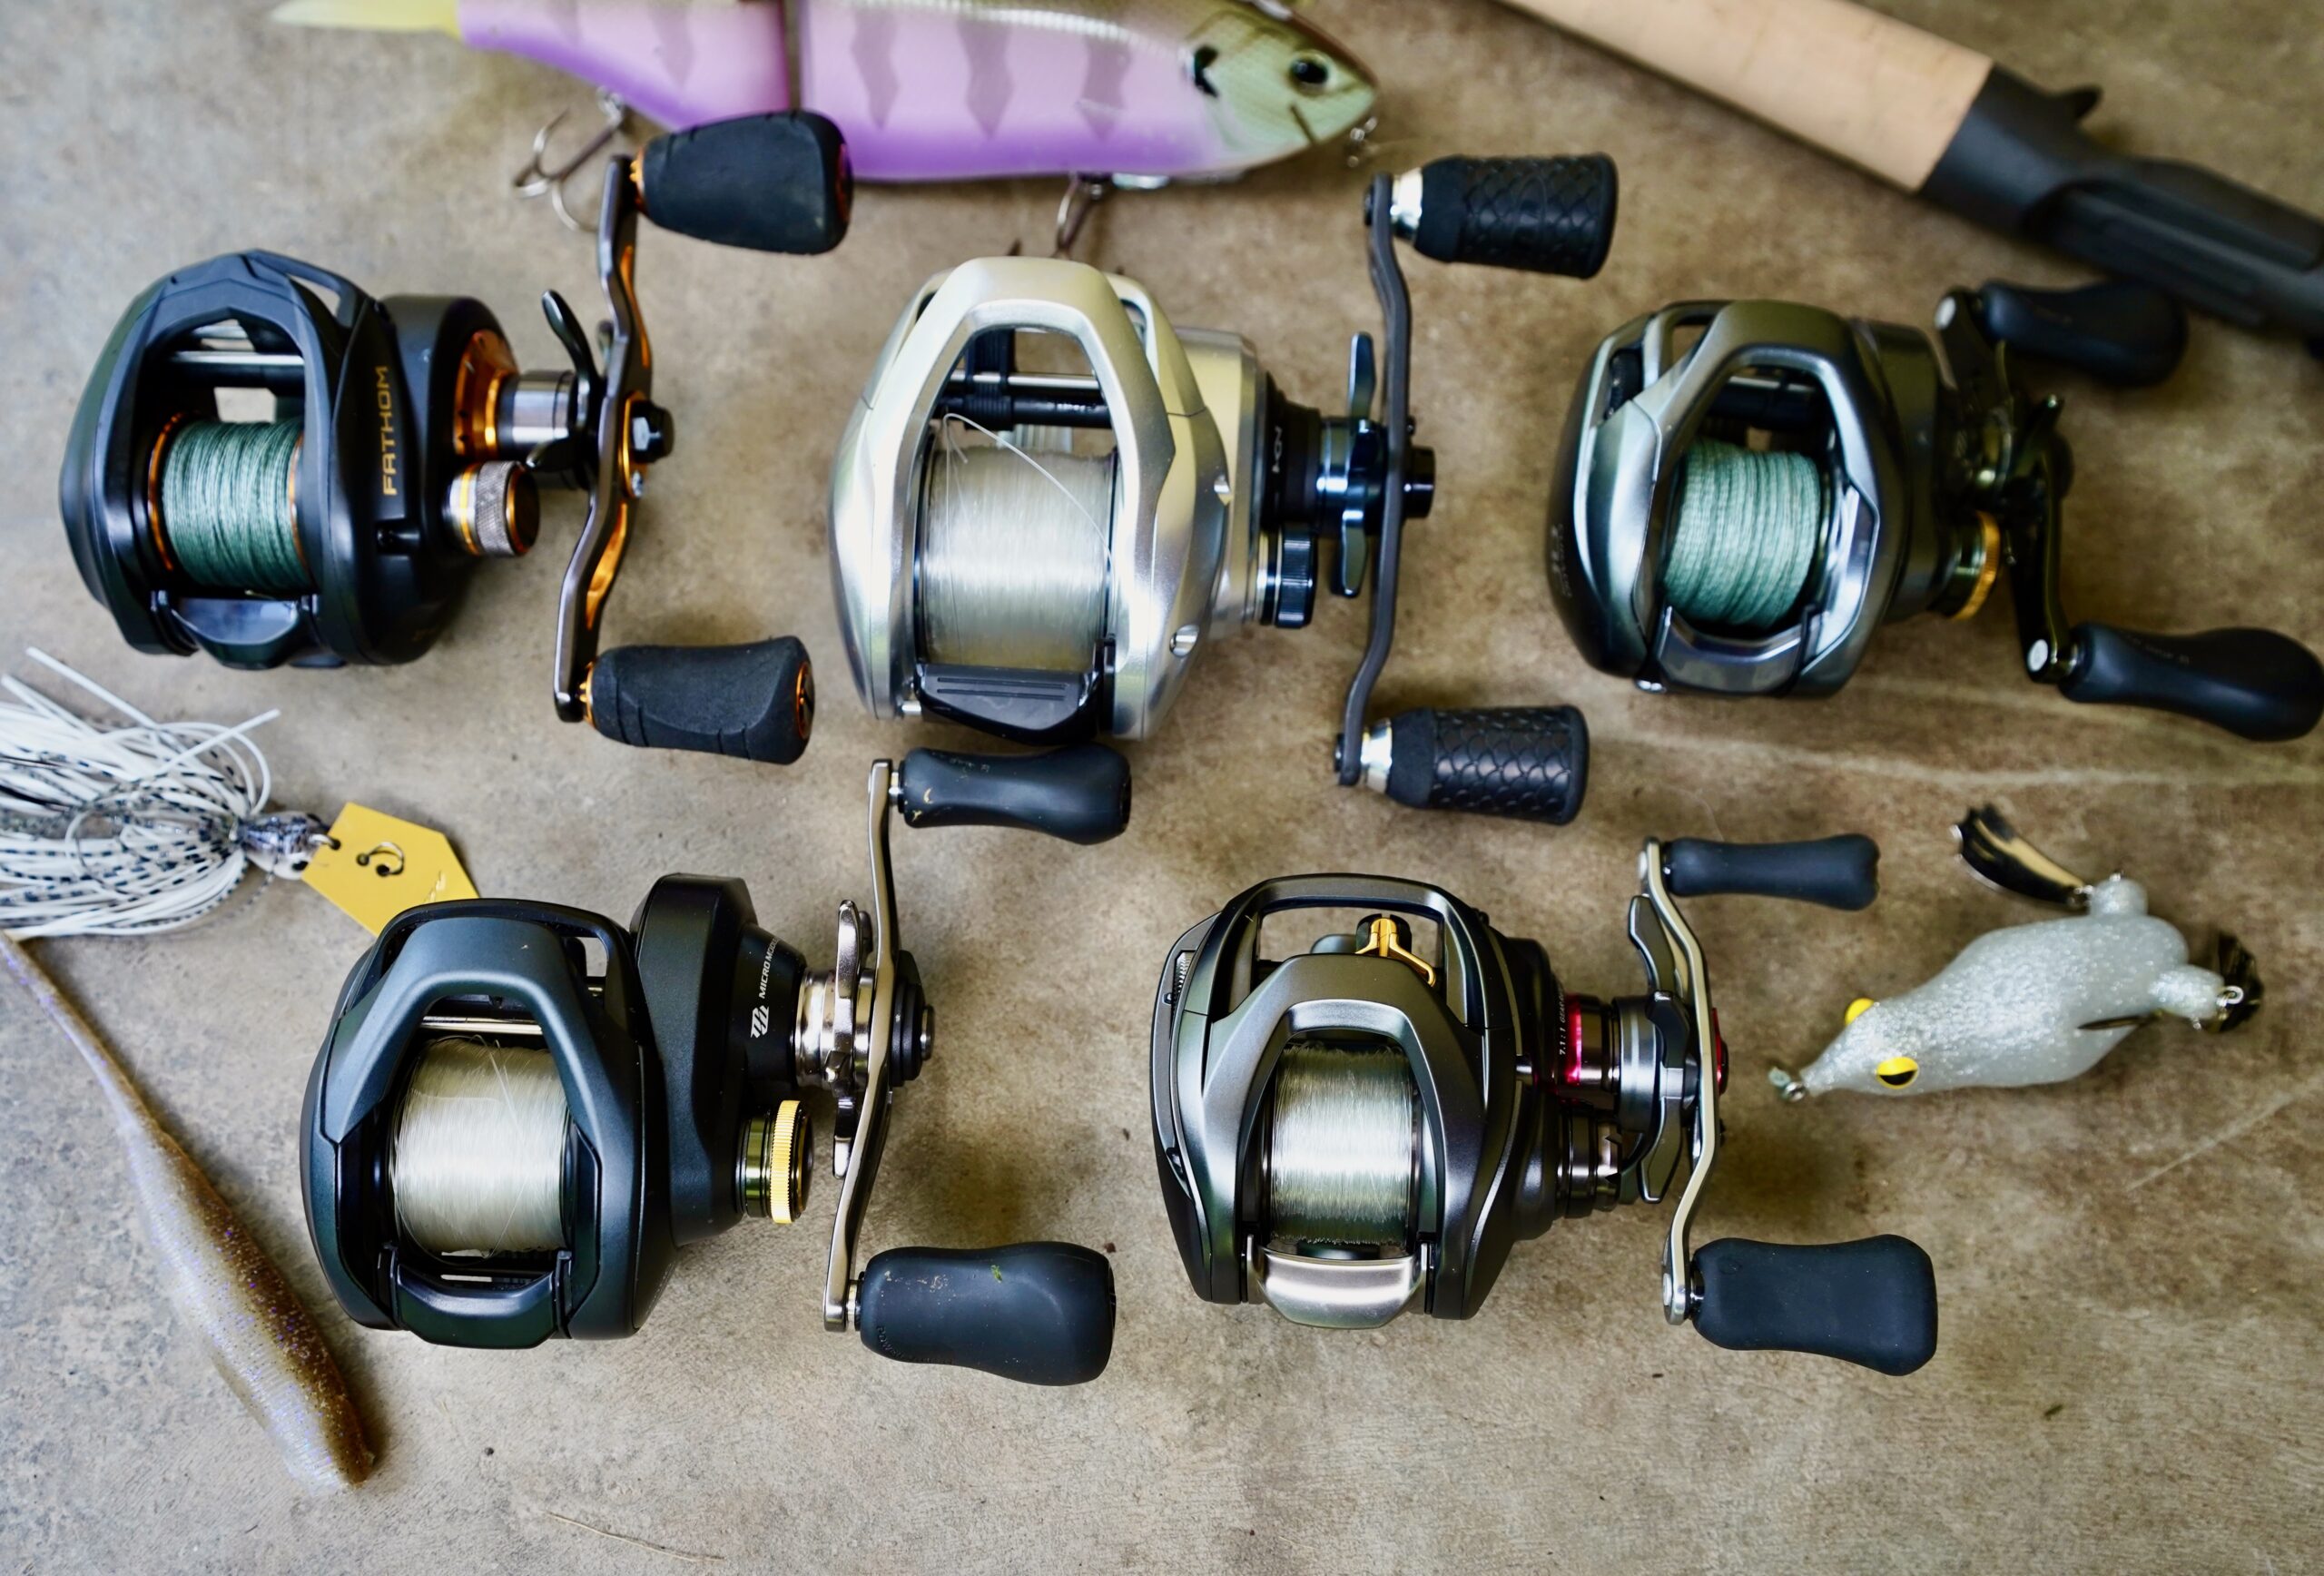 Do you NEED a 200 or 300 Size Fishing Reel?, Swimbait Reels